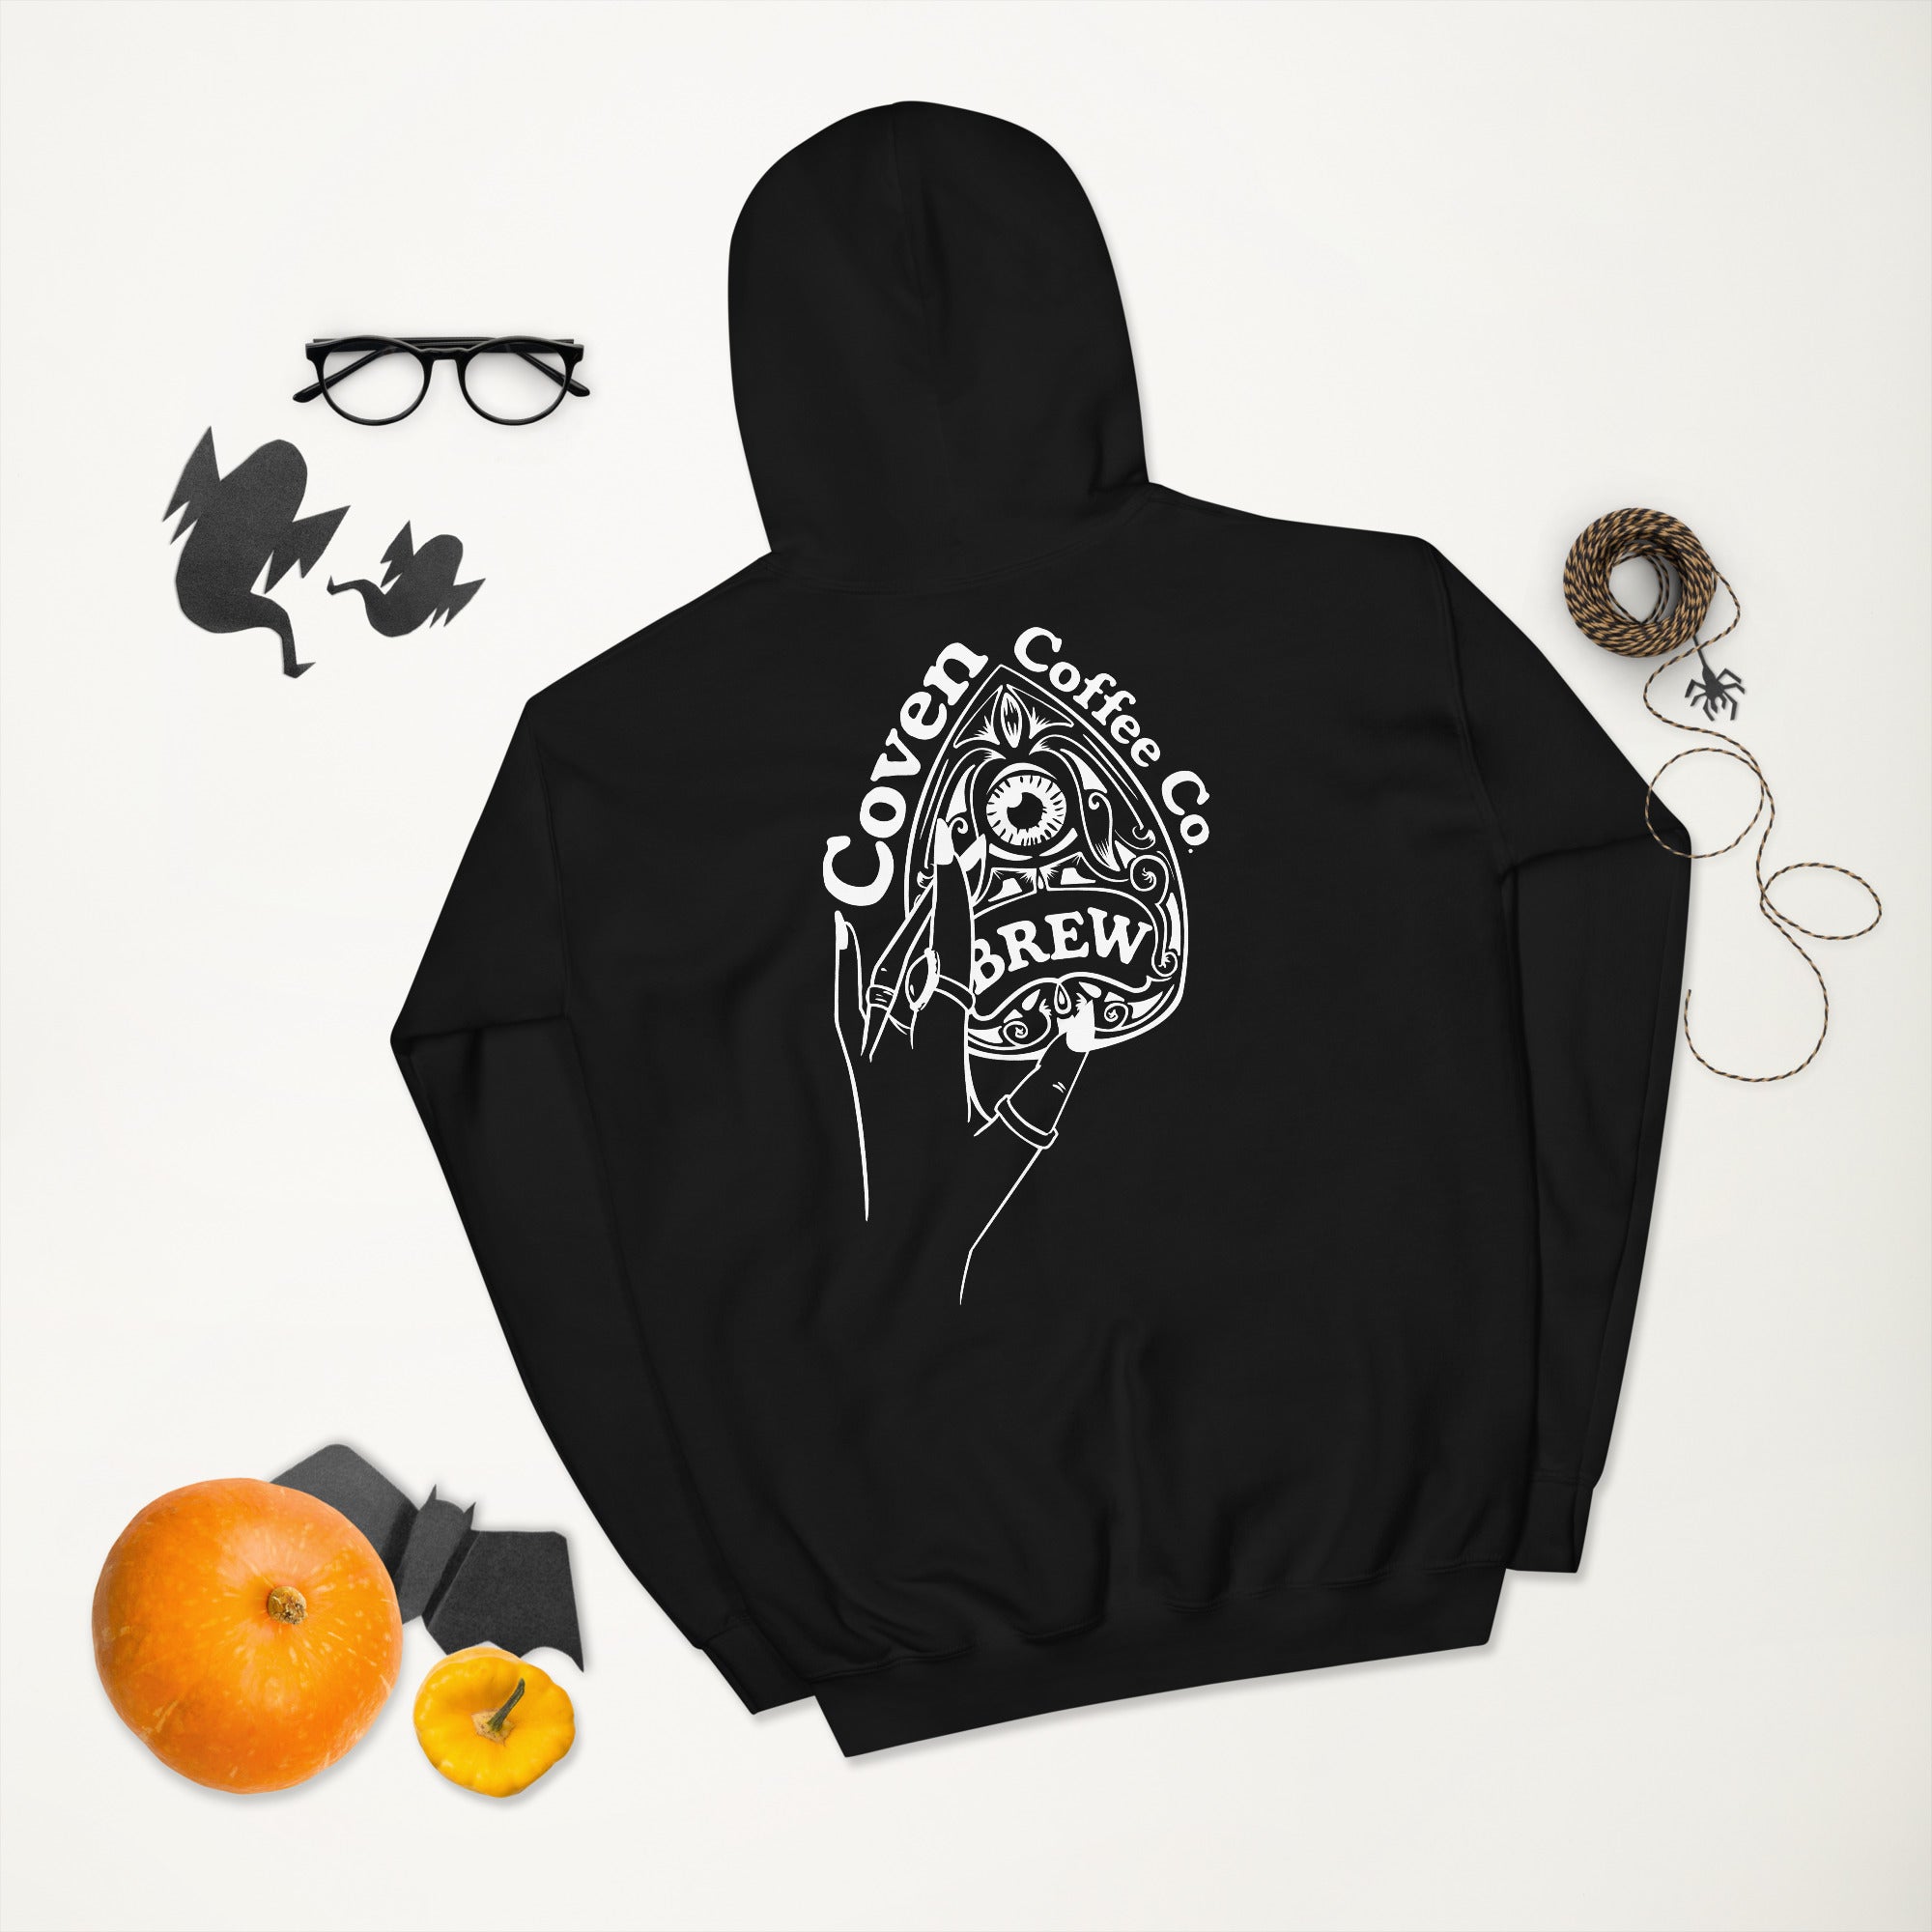 Coven Pullover Hoodie